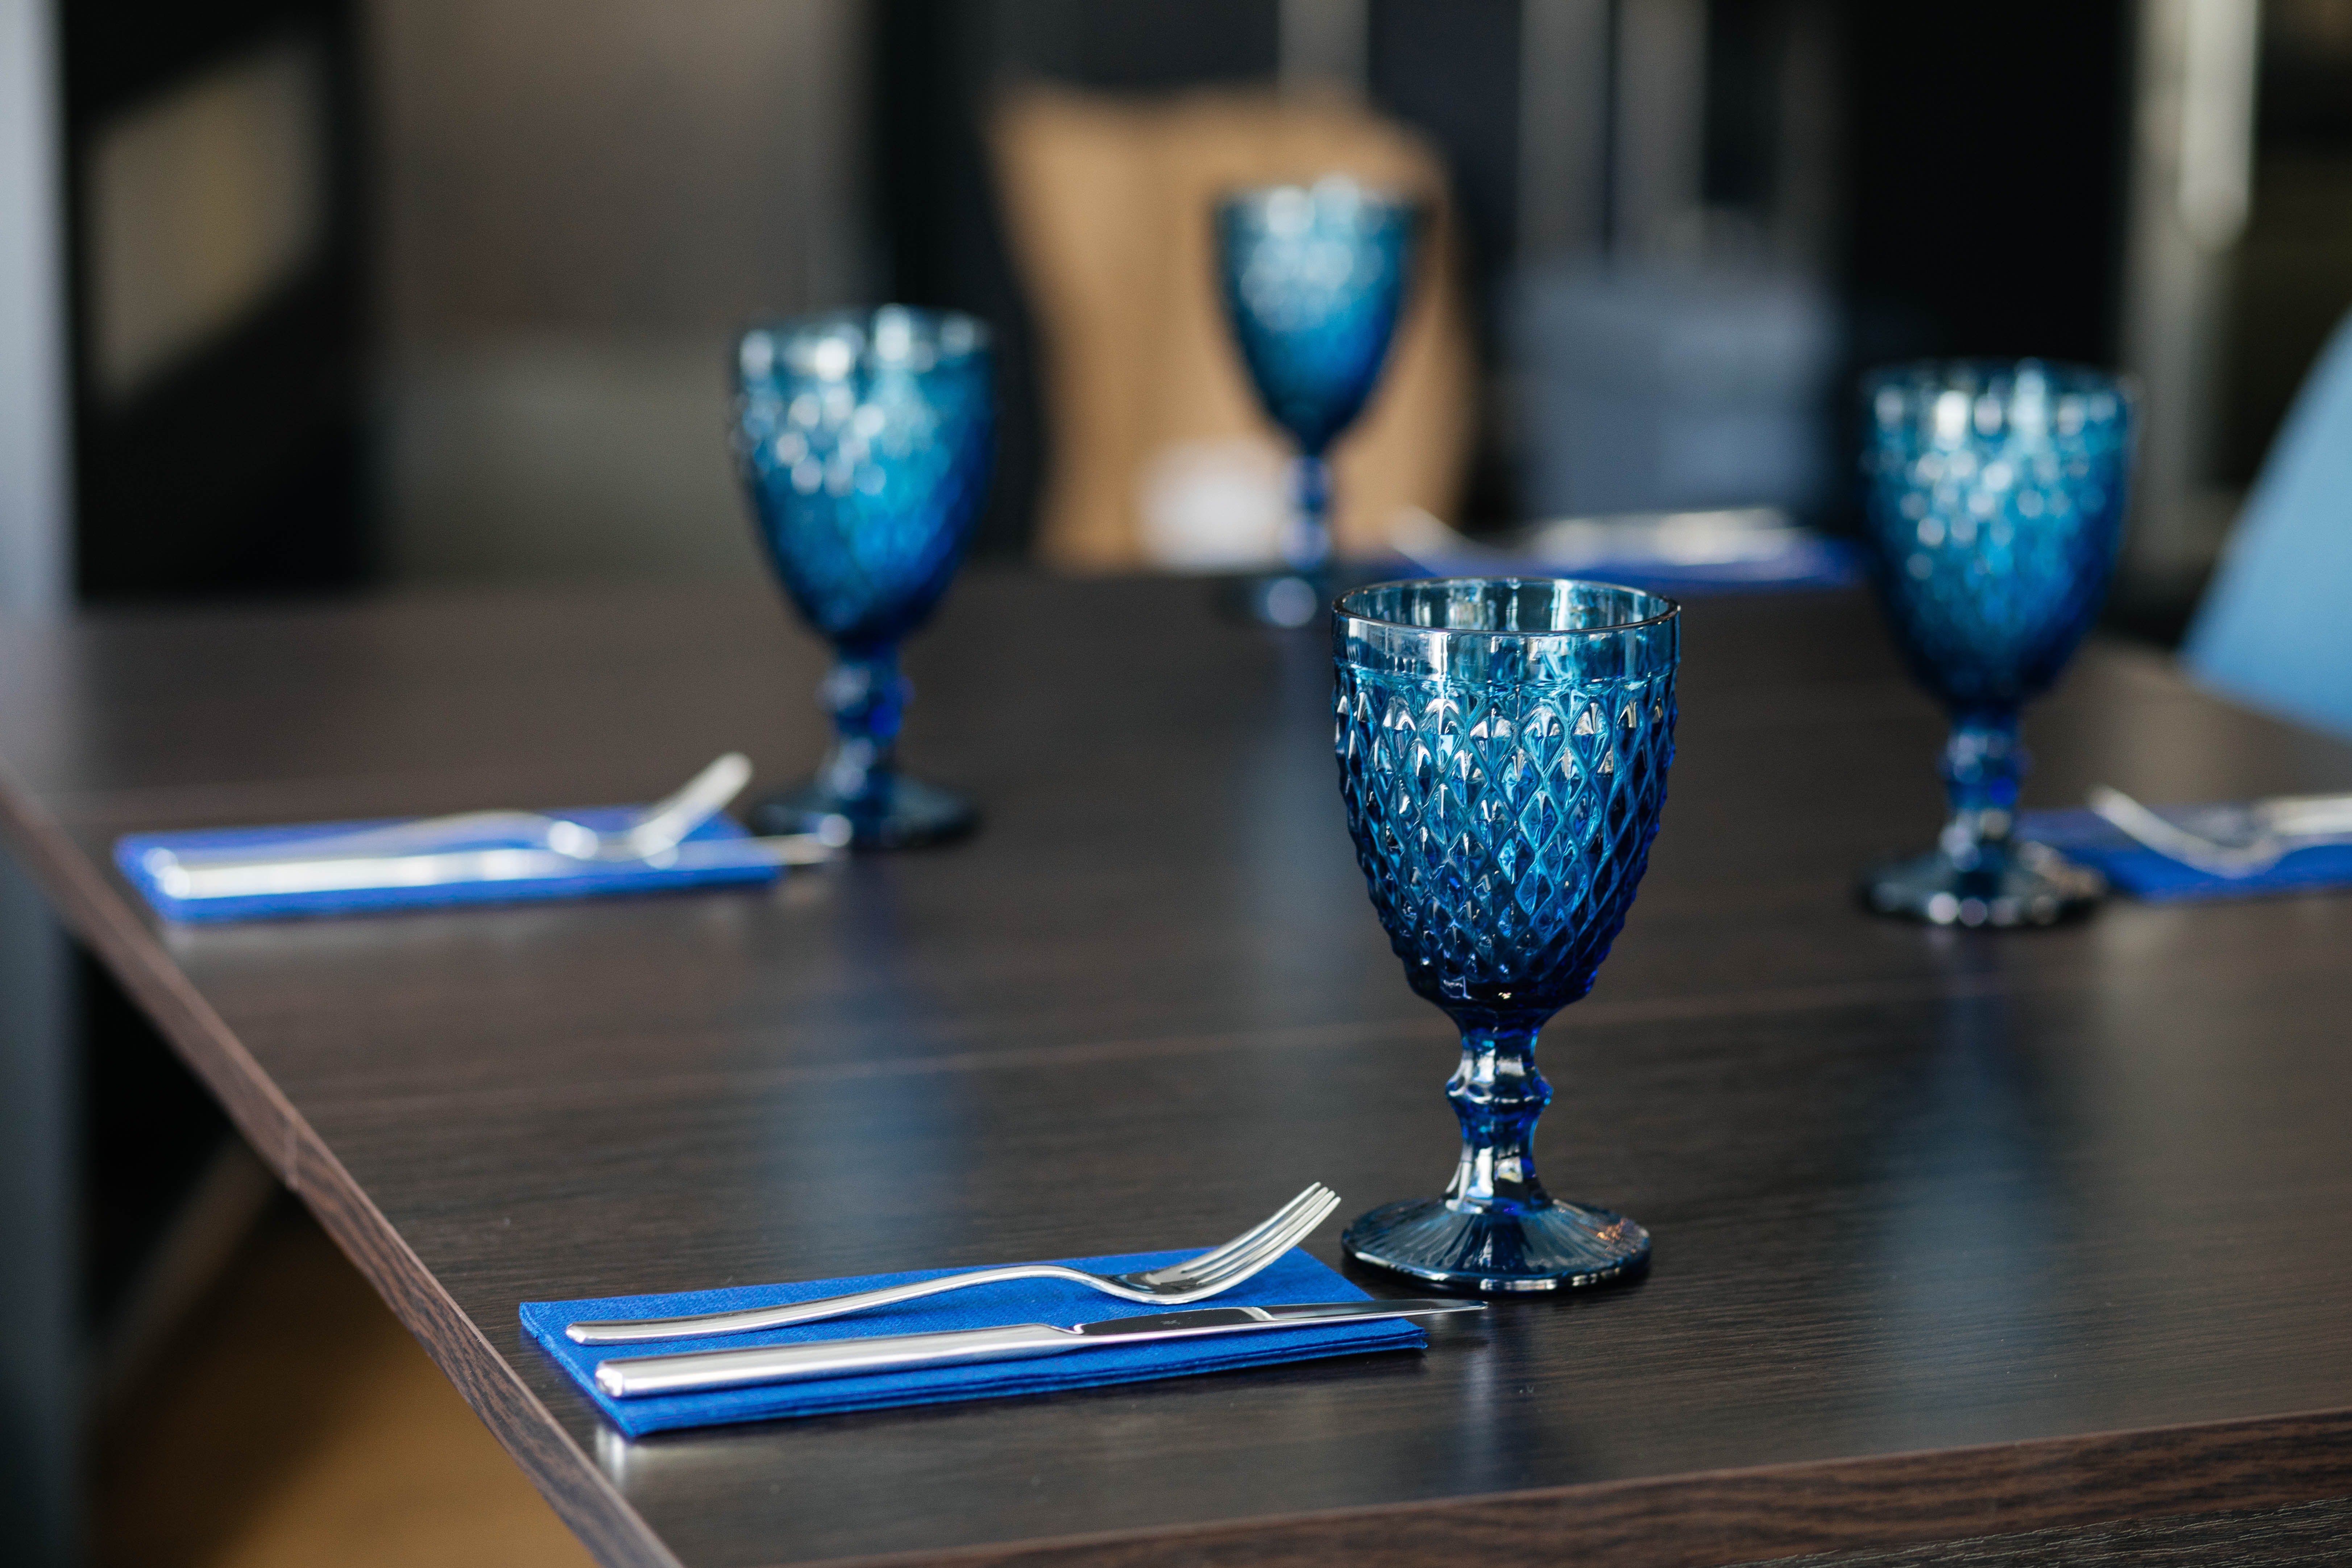 Blue goblets on the table